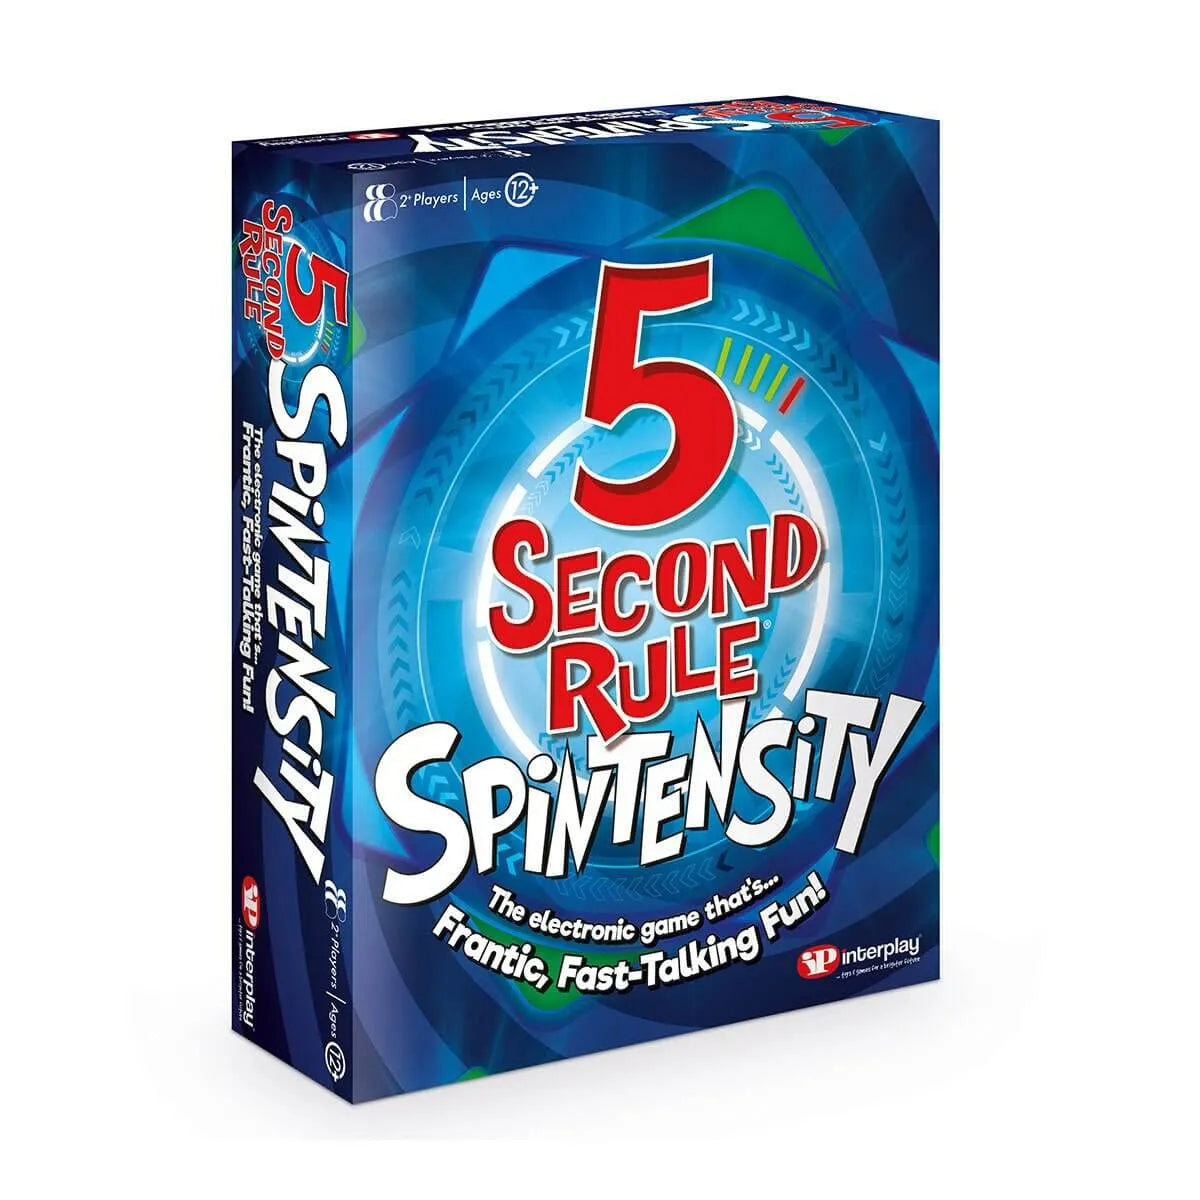 Playmonster games - 5 second rule game by playmonster - shop 5 second rule game from The Toy Room